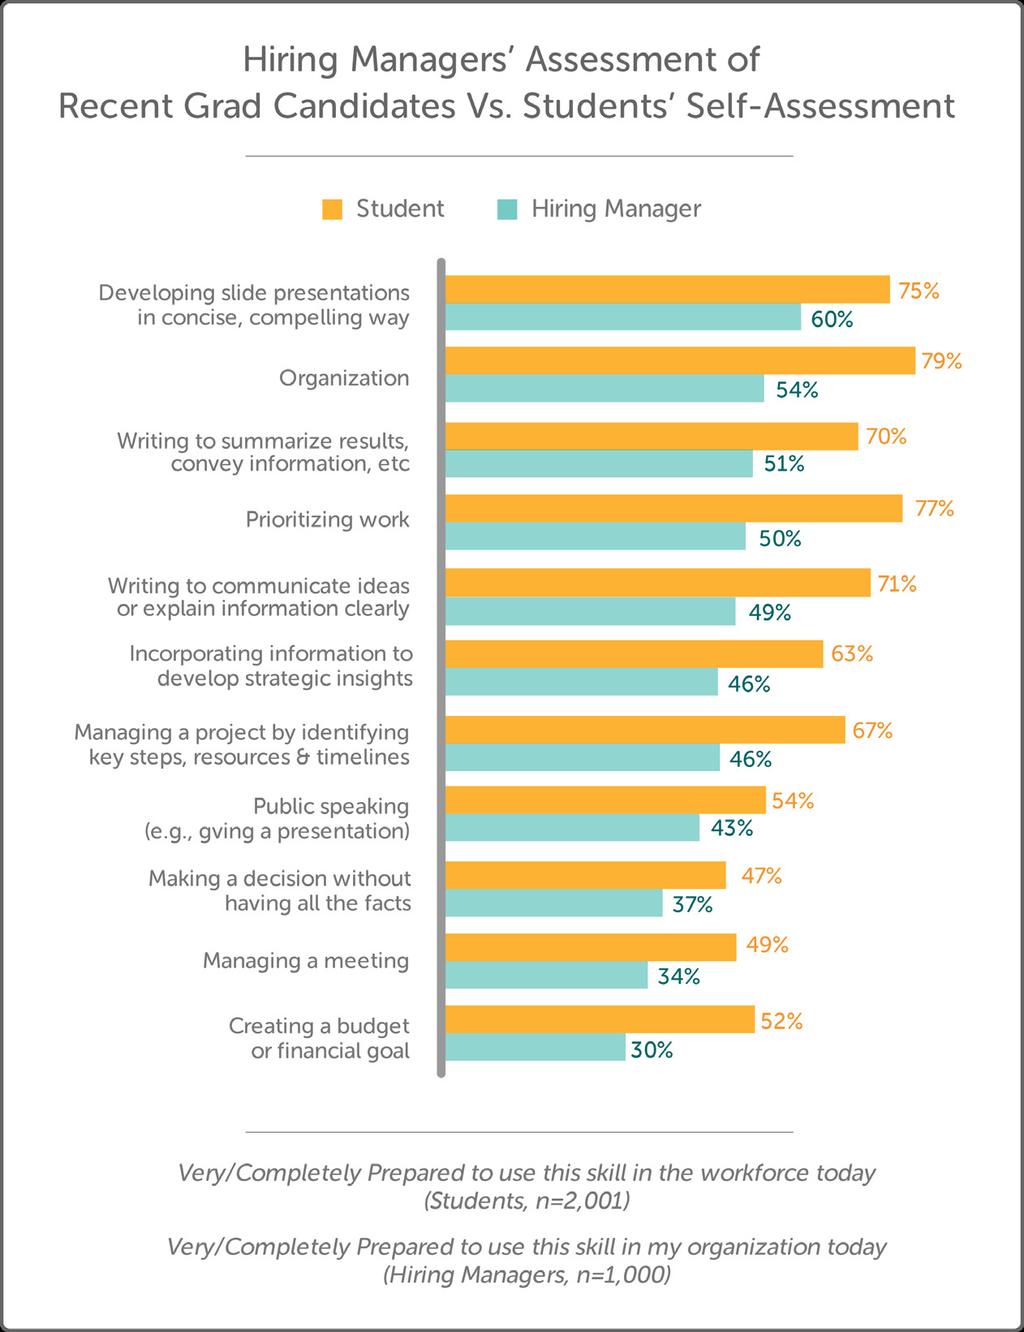 Skills Gap: Business Basics When it comes to business basics, students assessment of their own skill-mastery exceeded hiring managers assessments of recent graduates they have interviewed, on every